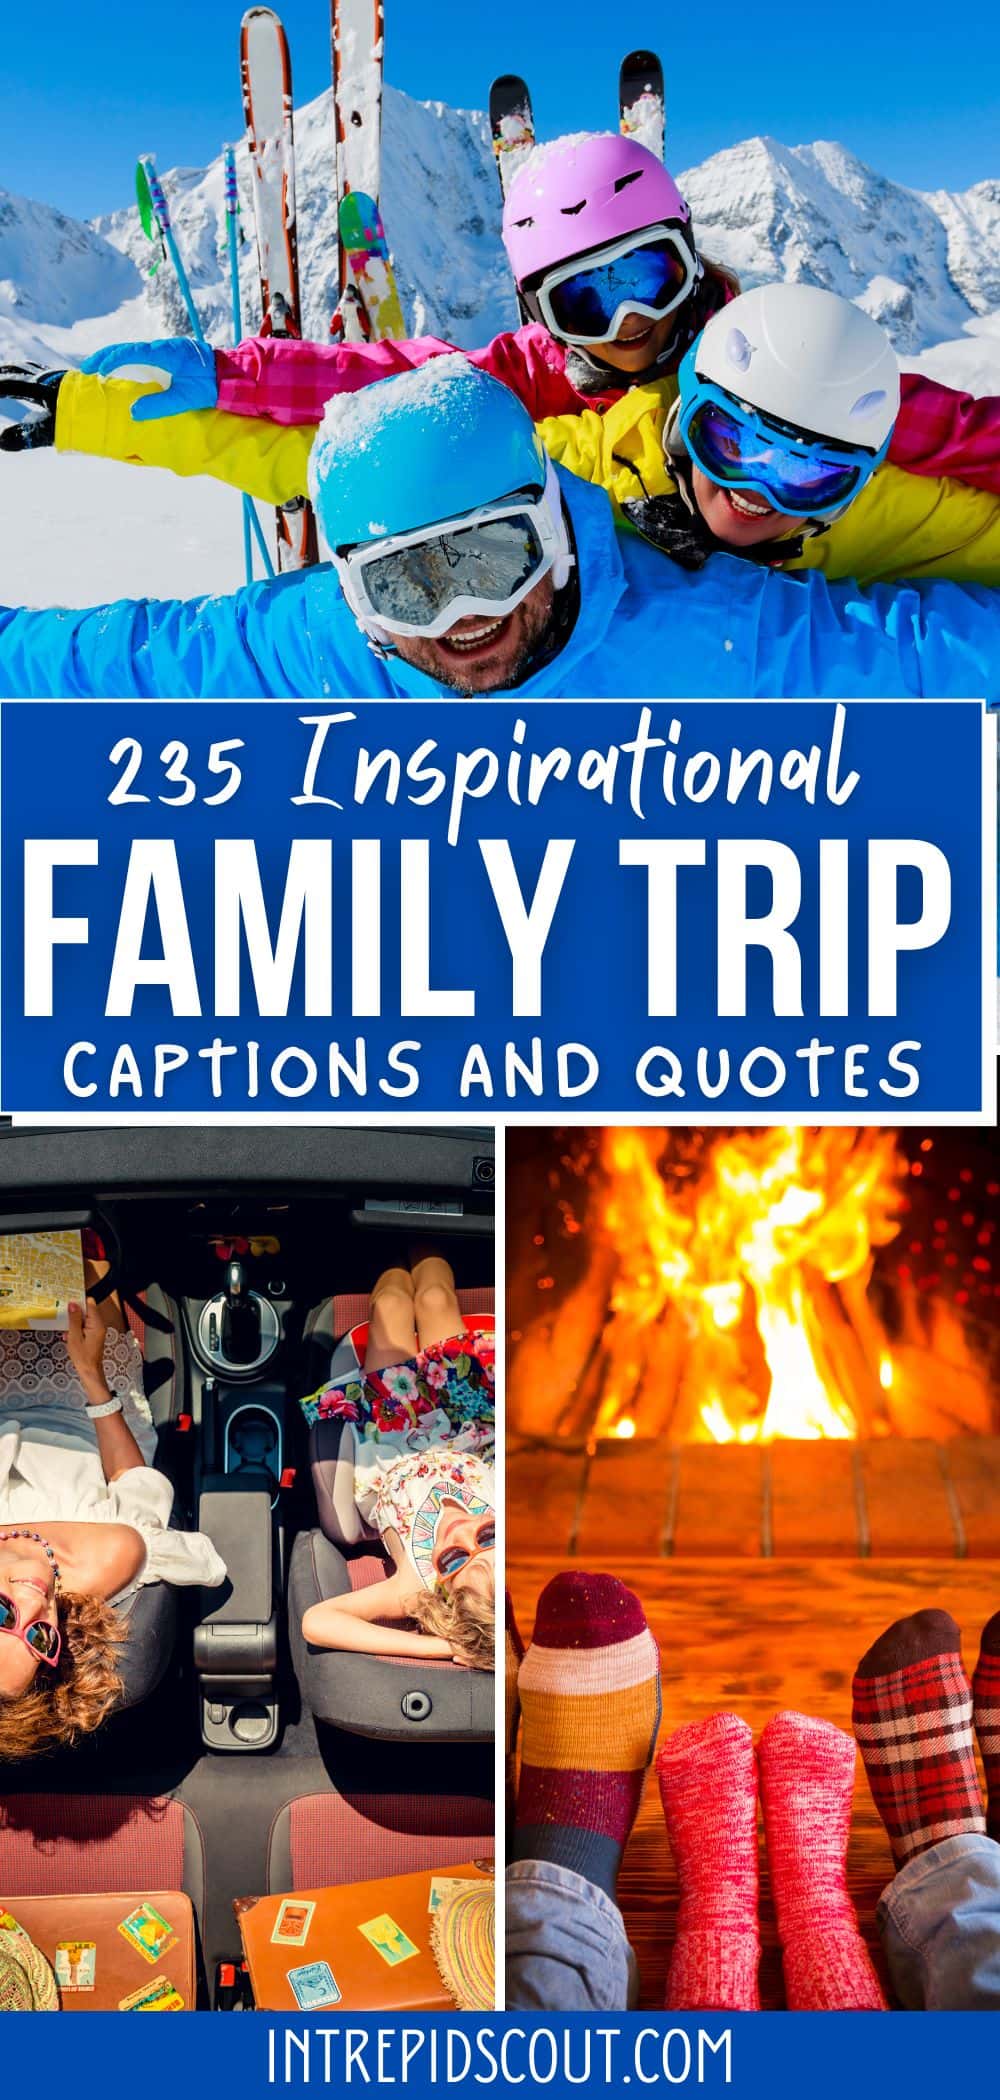 Family Trip Captions and Quotes